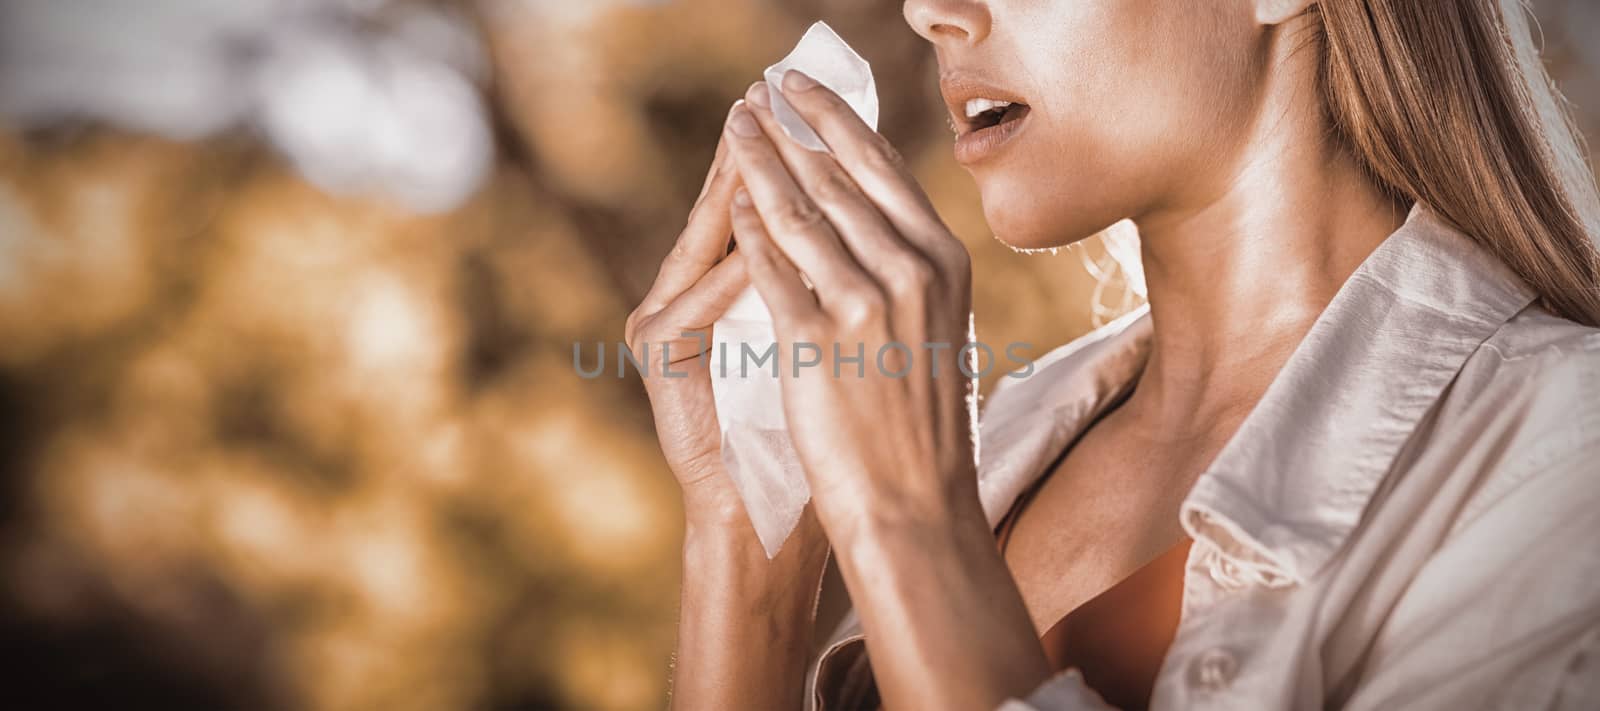 Beautiful woman using tissue while sneezing in park